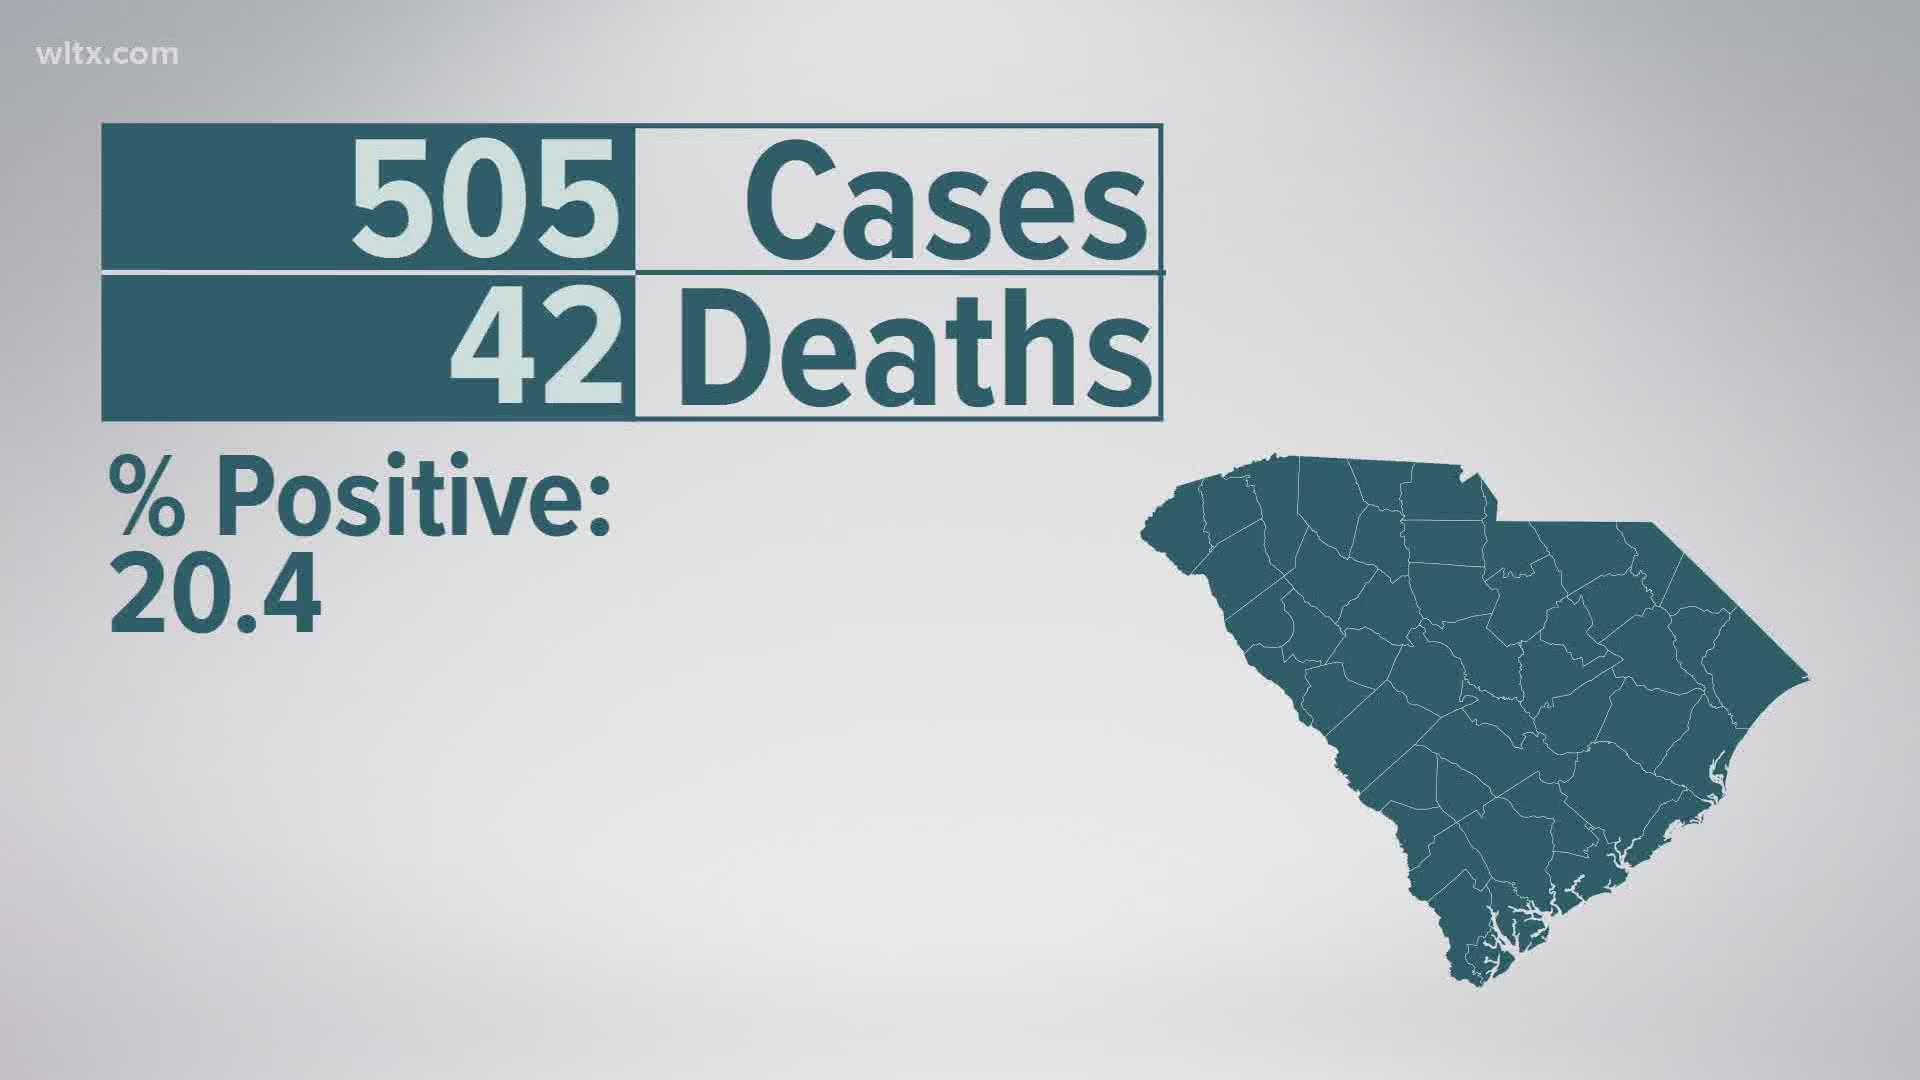 This brings the total number of confirmed cases to 112,643, probable cases to 1,450, confirmed deaths to 2,451, and 122 probable deaths.